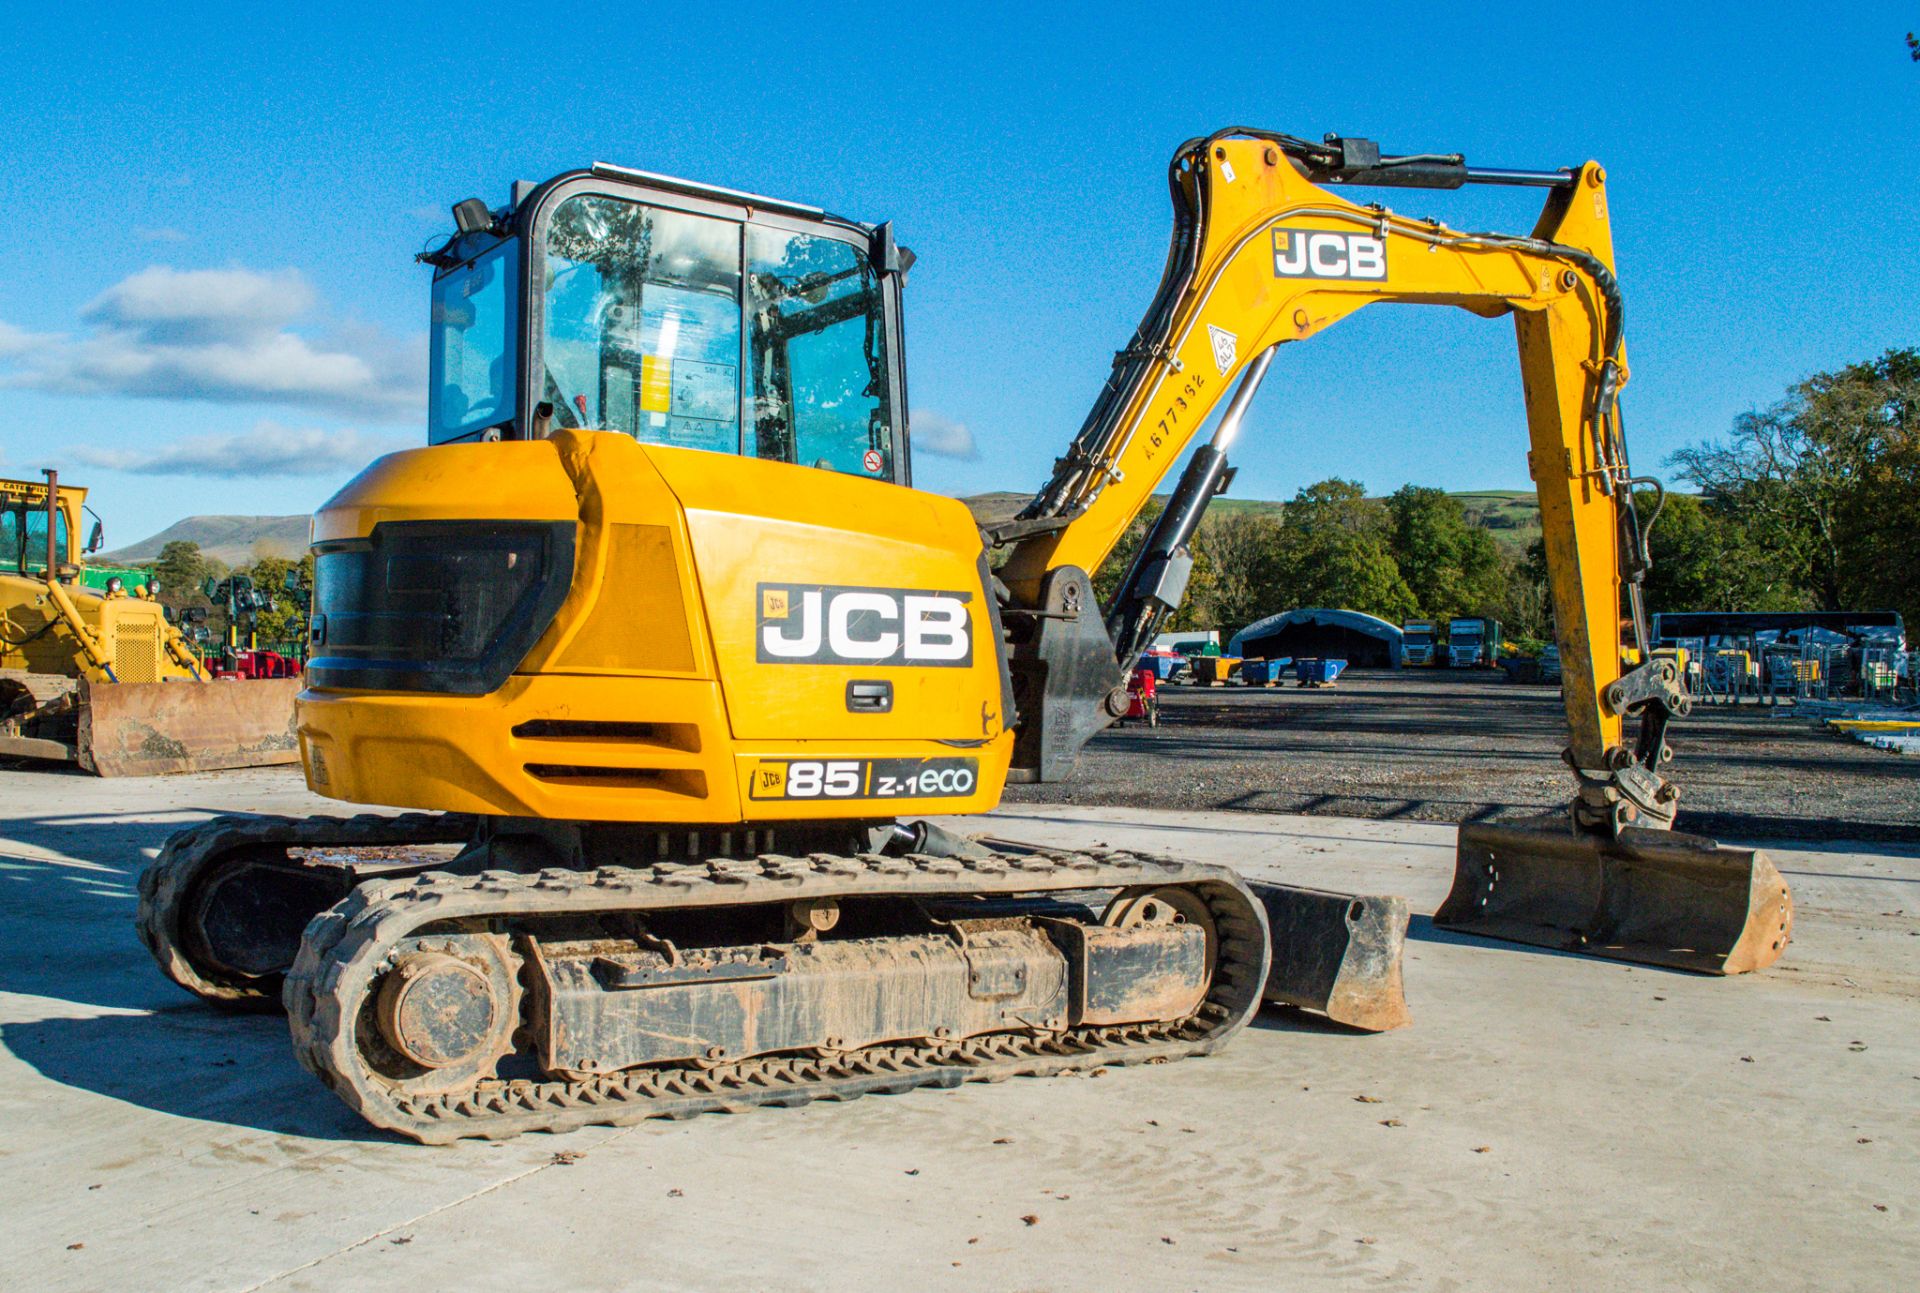 JCB 85 Z-1 ECO 8.5 tonne rubber tracked excavator Year: 2015 S/N: 22249019 Recorded Hours: 3956 - Image 3 of 18